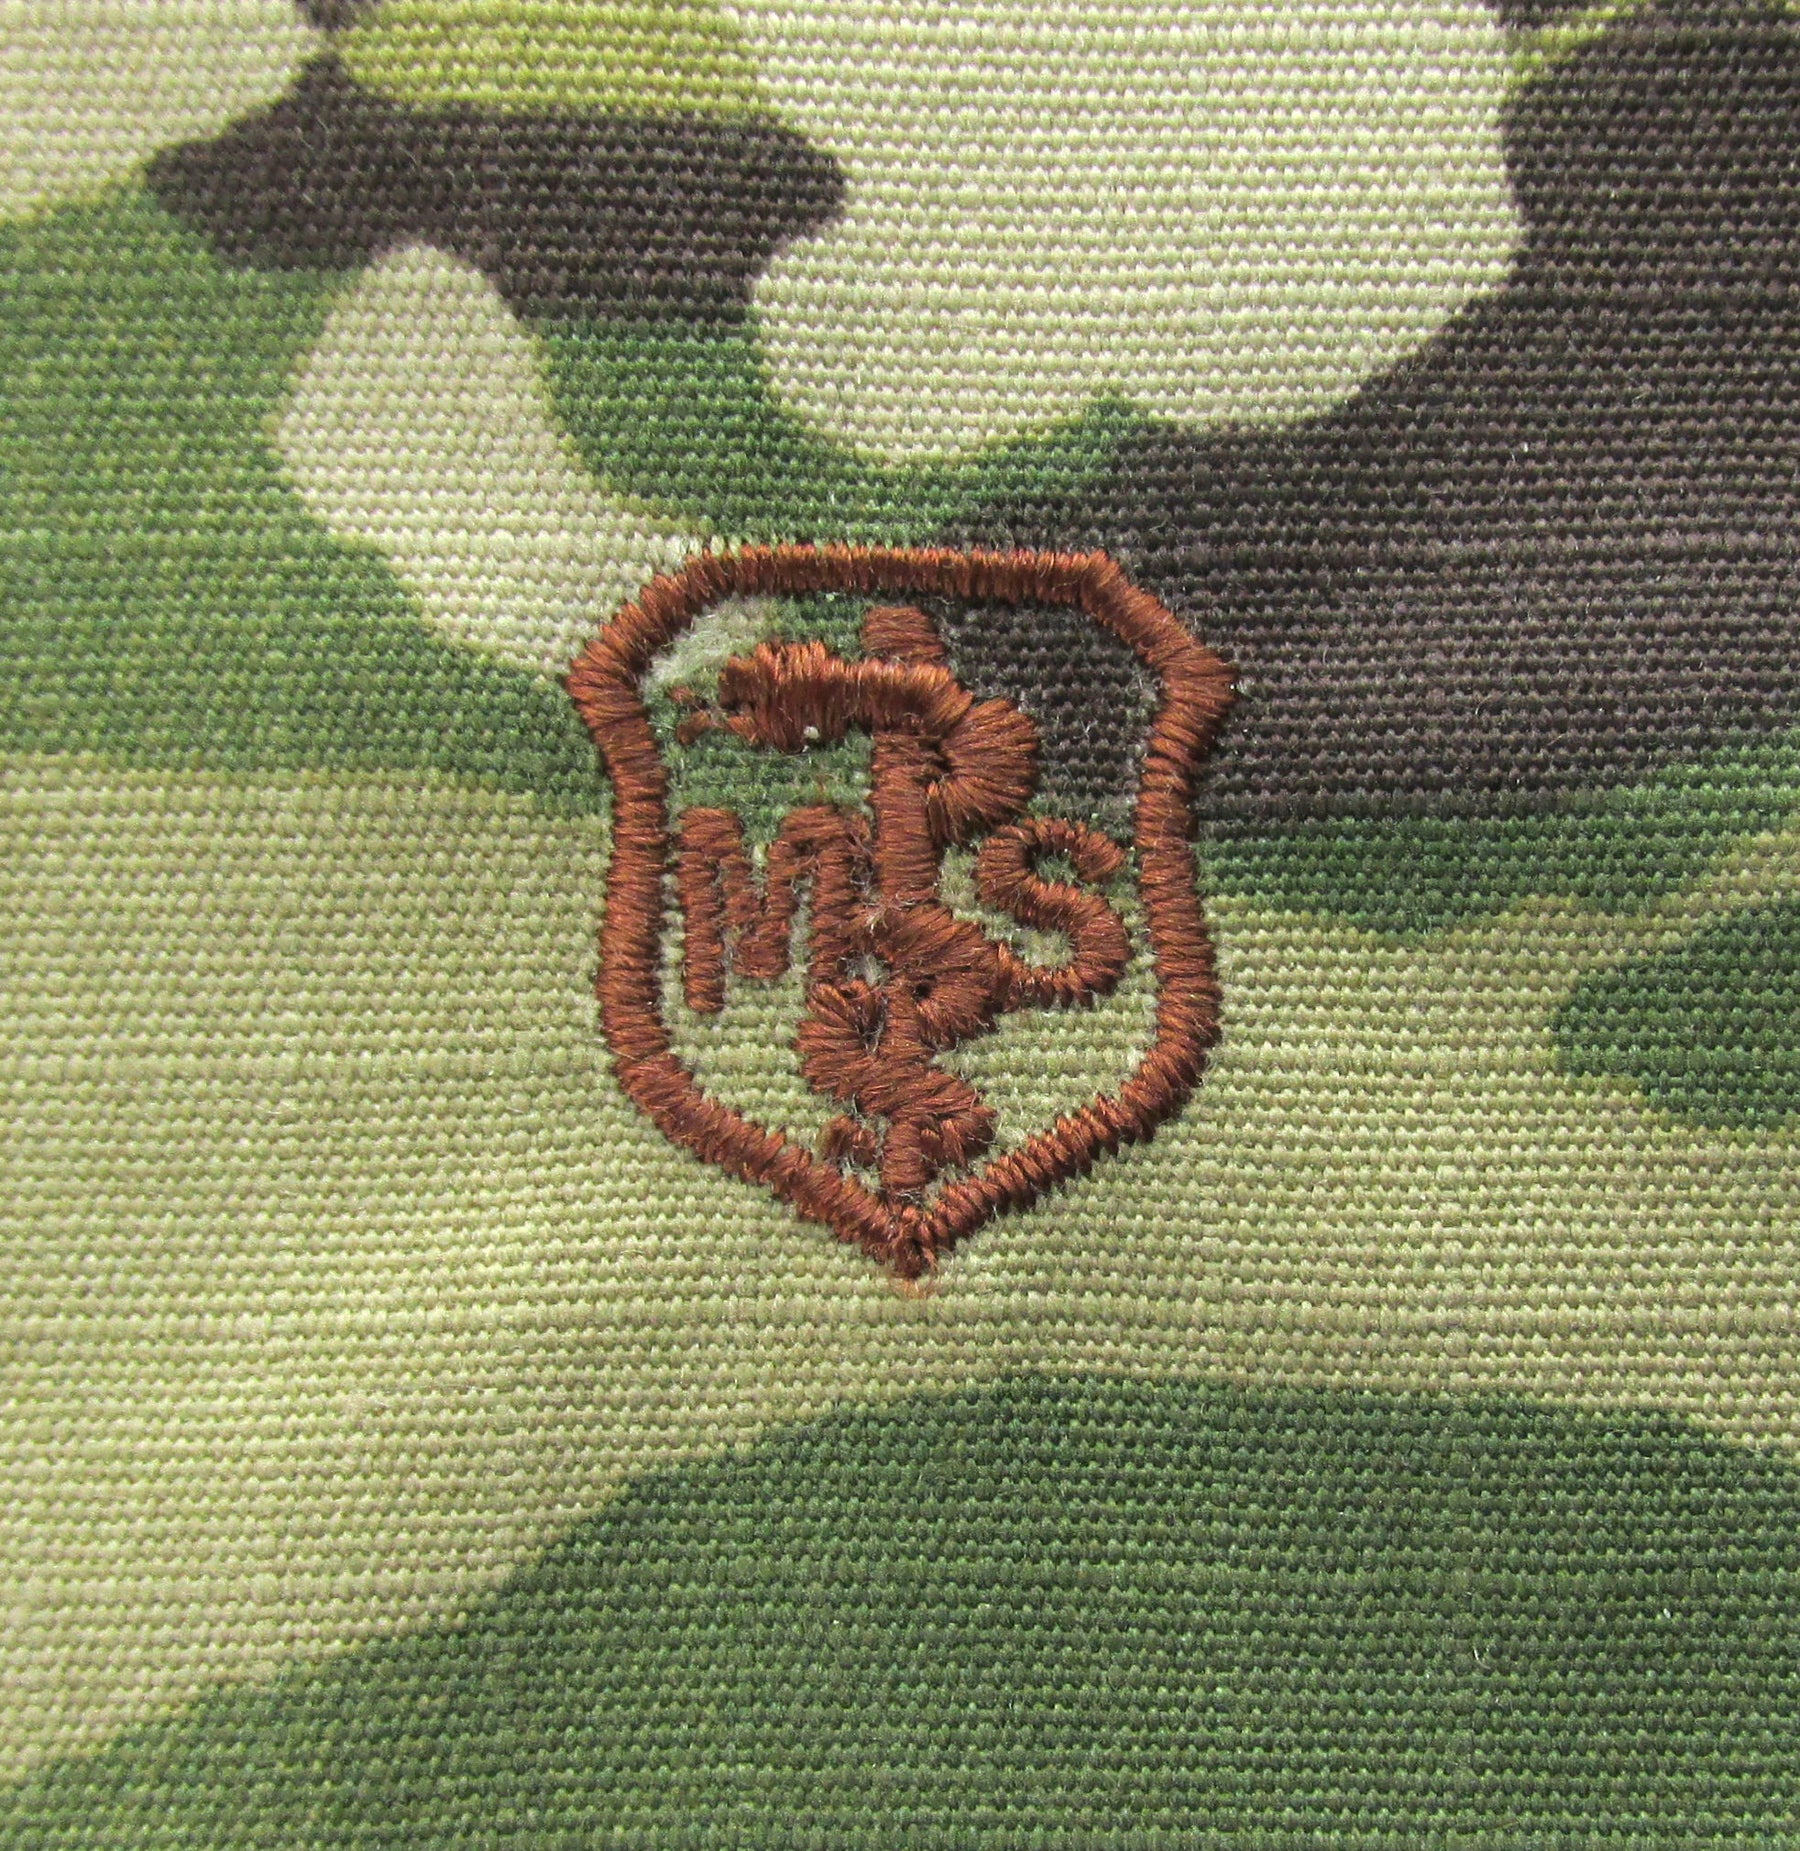 Medical Services OCP Air Force Badge - SPICE BROWN